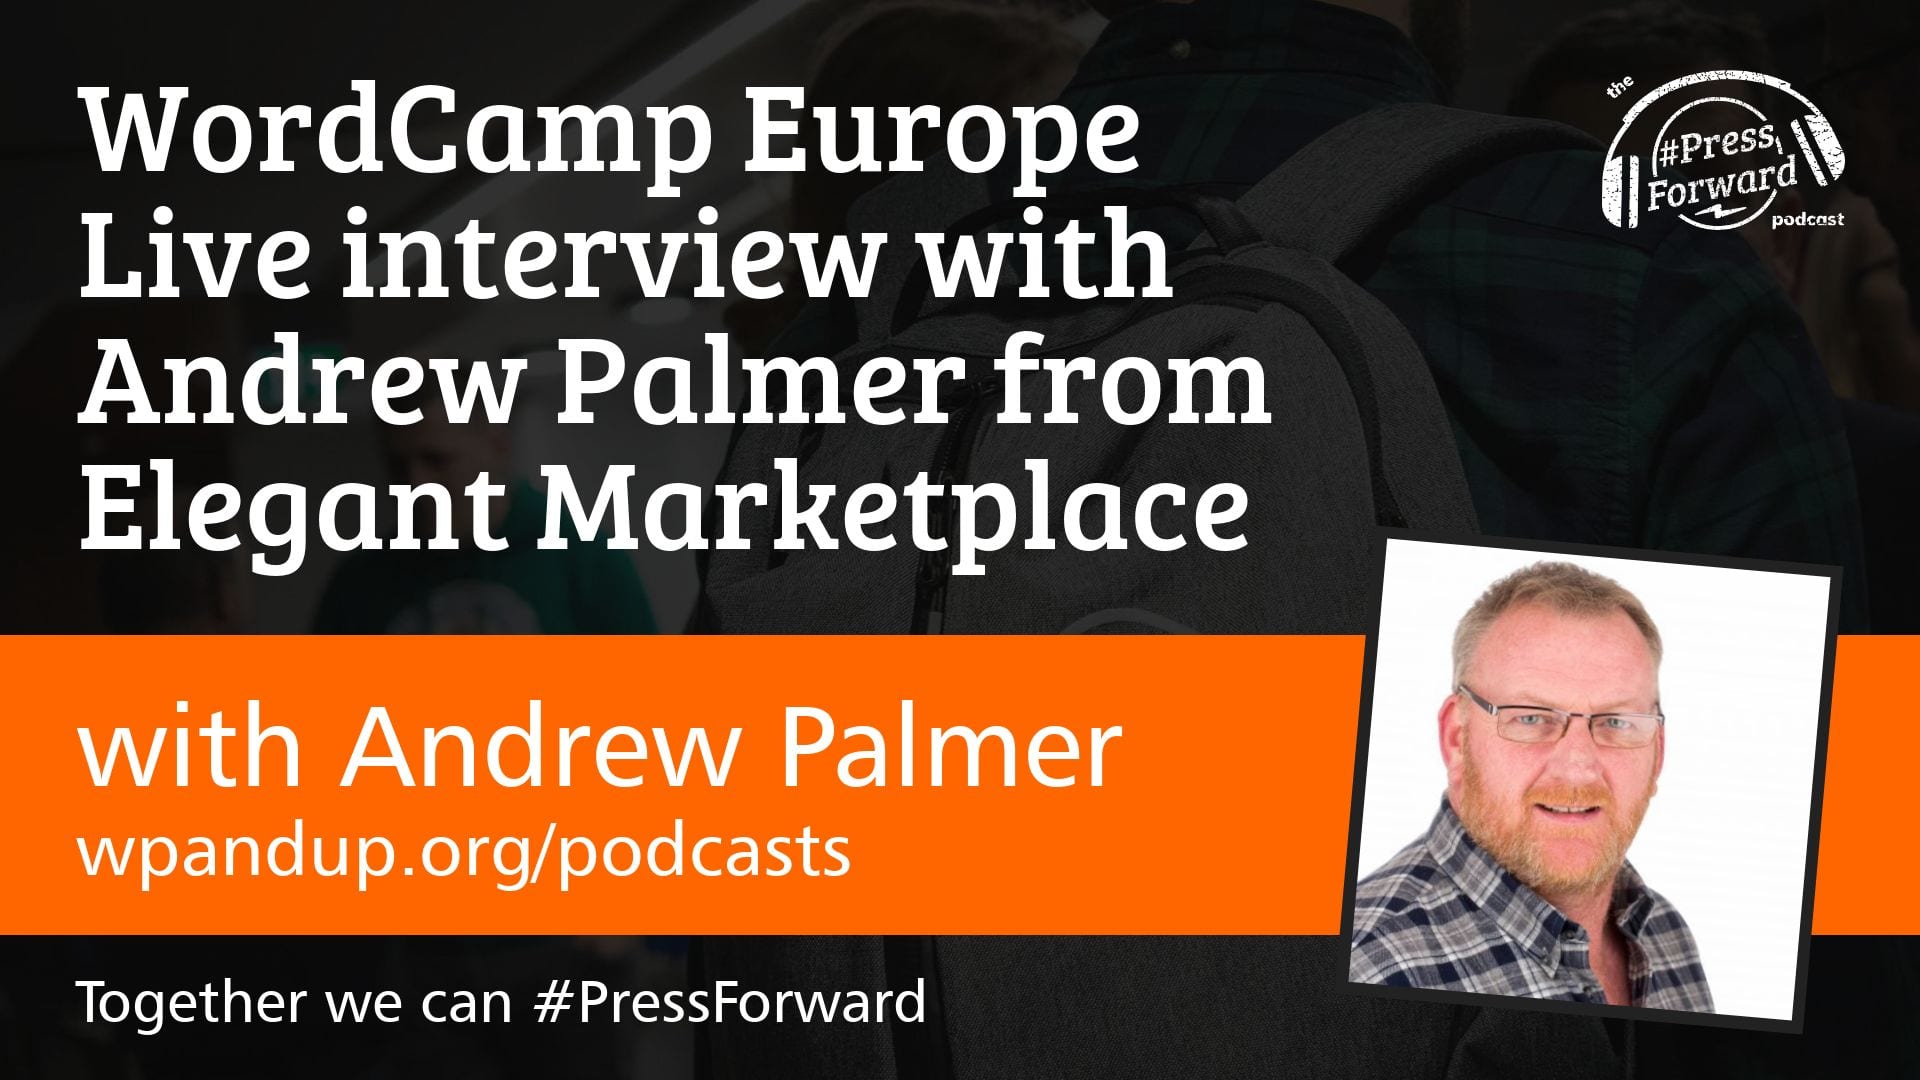 WordCamp Europe Live interview with Andrew Palmer from Elegant Marketplace - #011